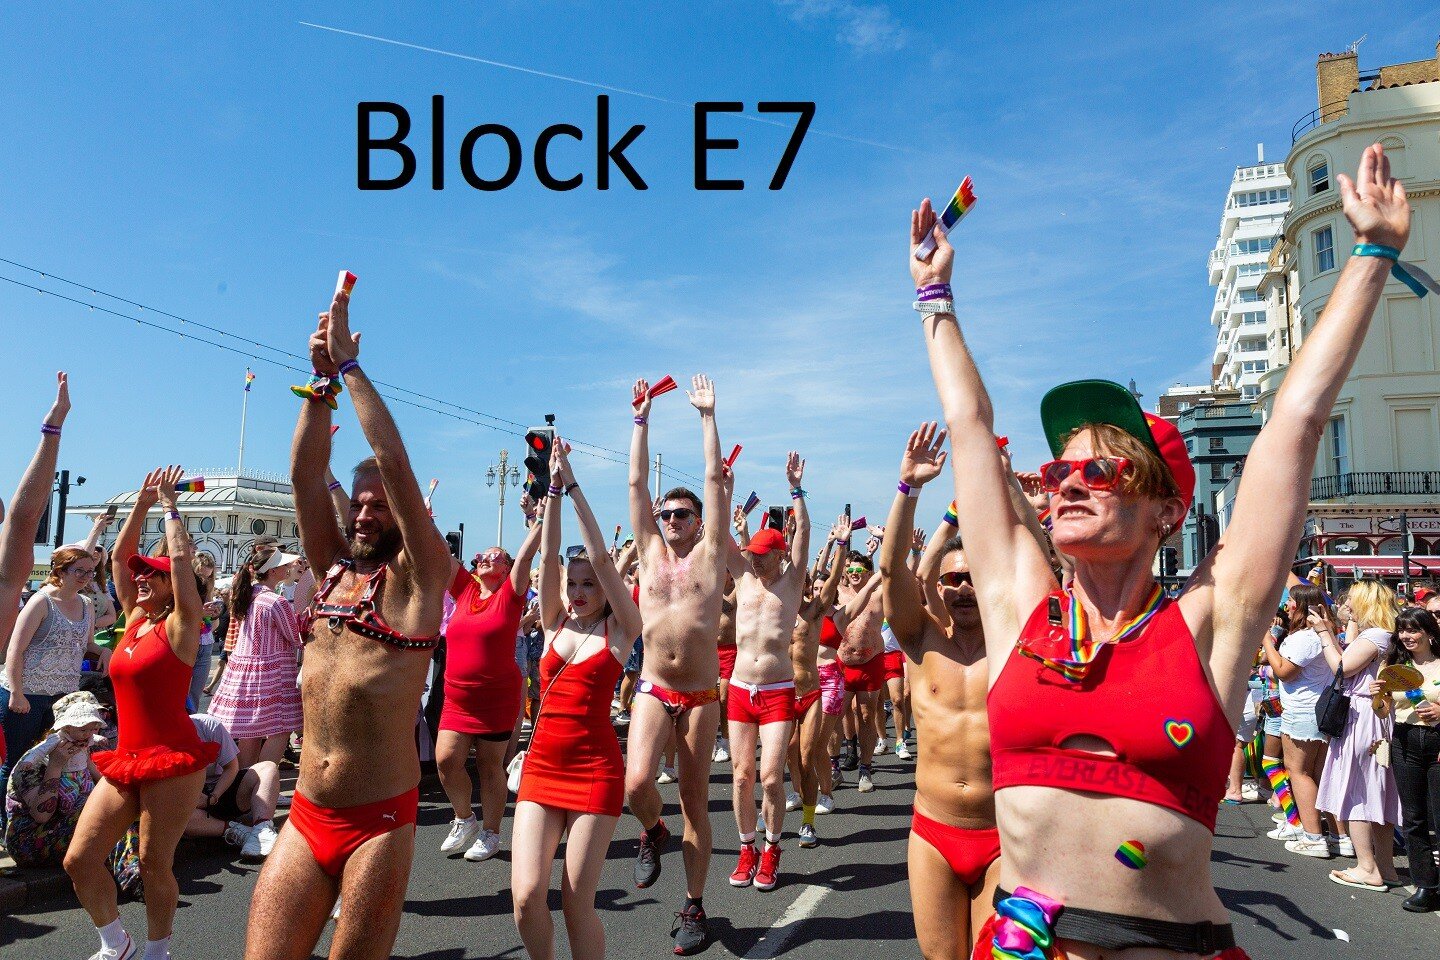 Just over a week to go. Pleased to announce that we will be in Block E7 in the 2023 parade. #pride #fabuloso #lgbtq🌈 #brighton #brightonpride #brightonpride2023